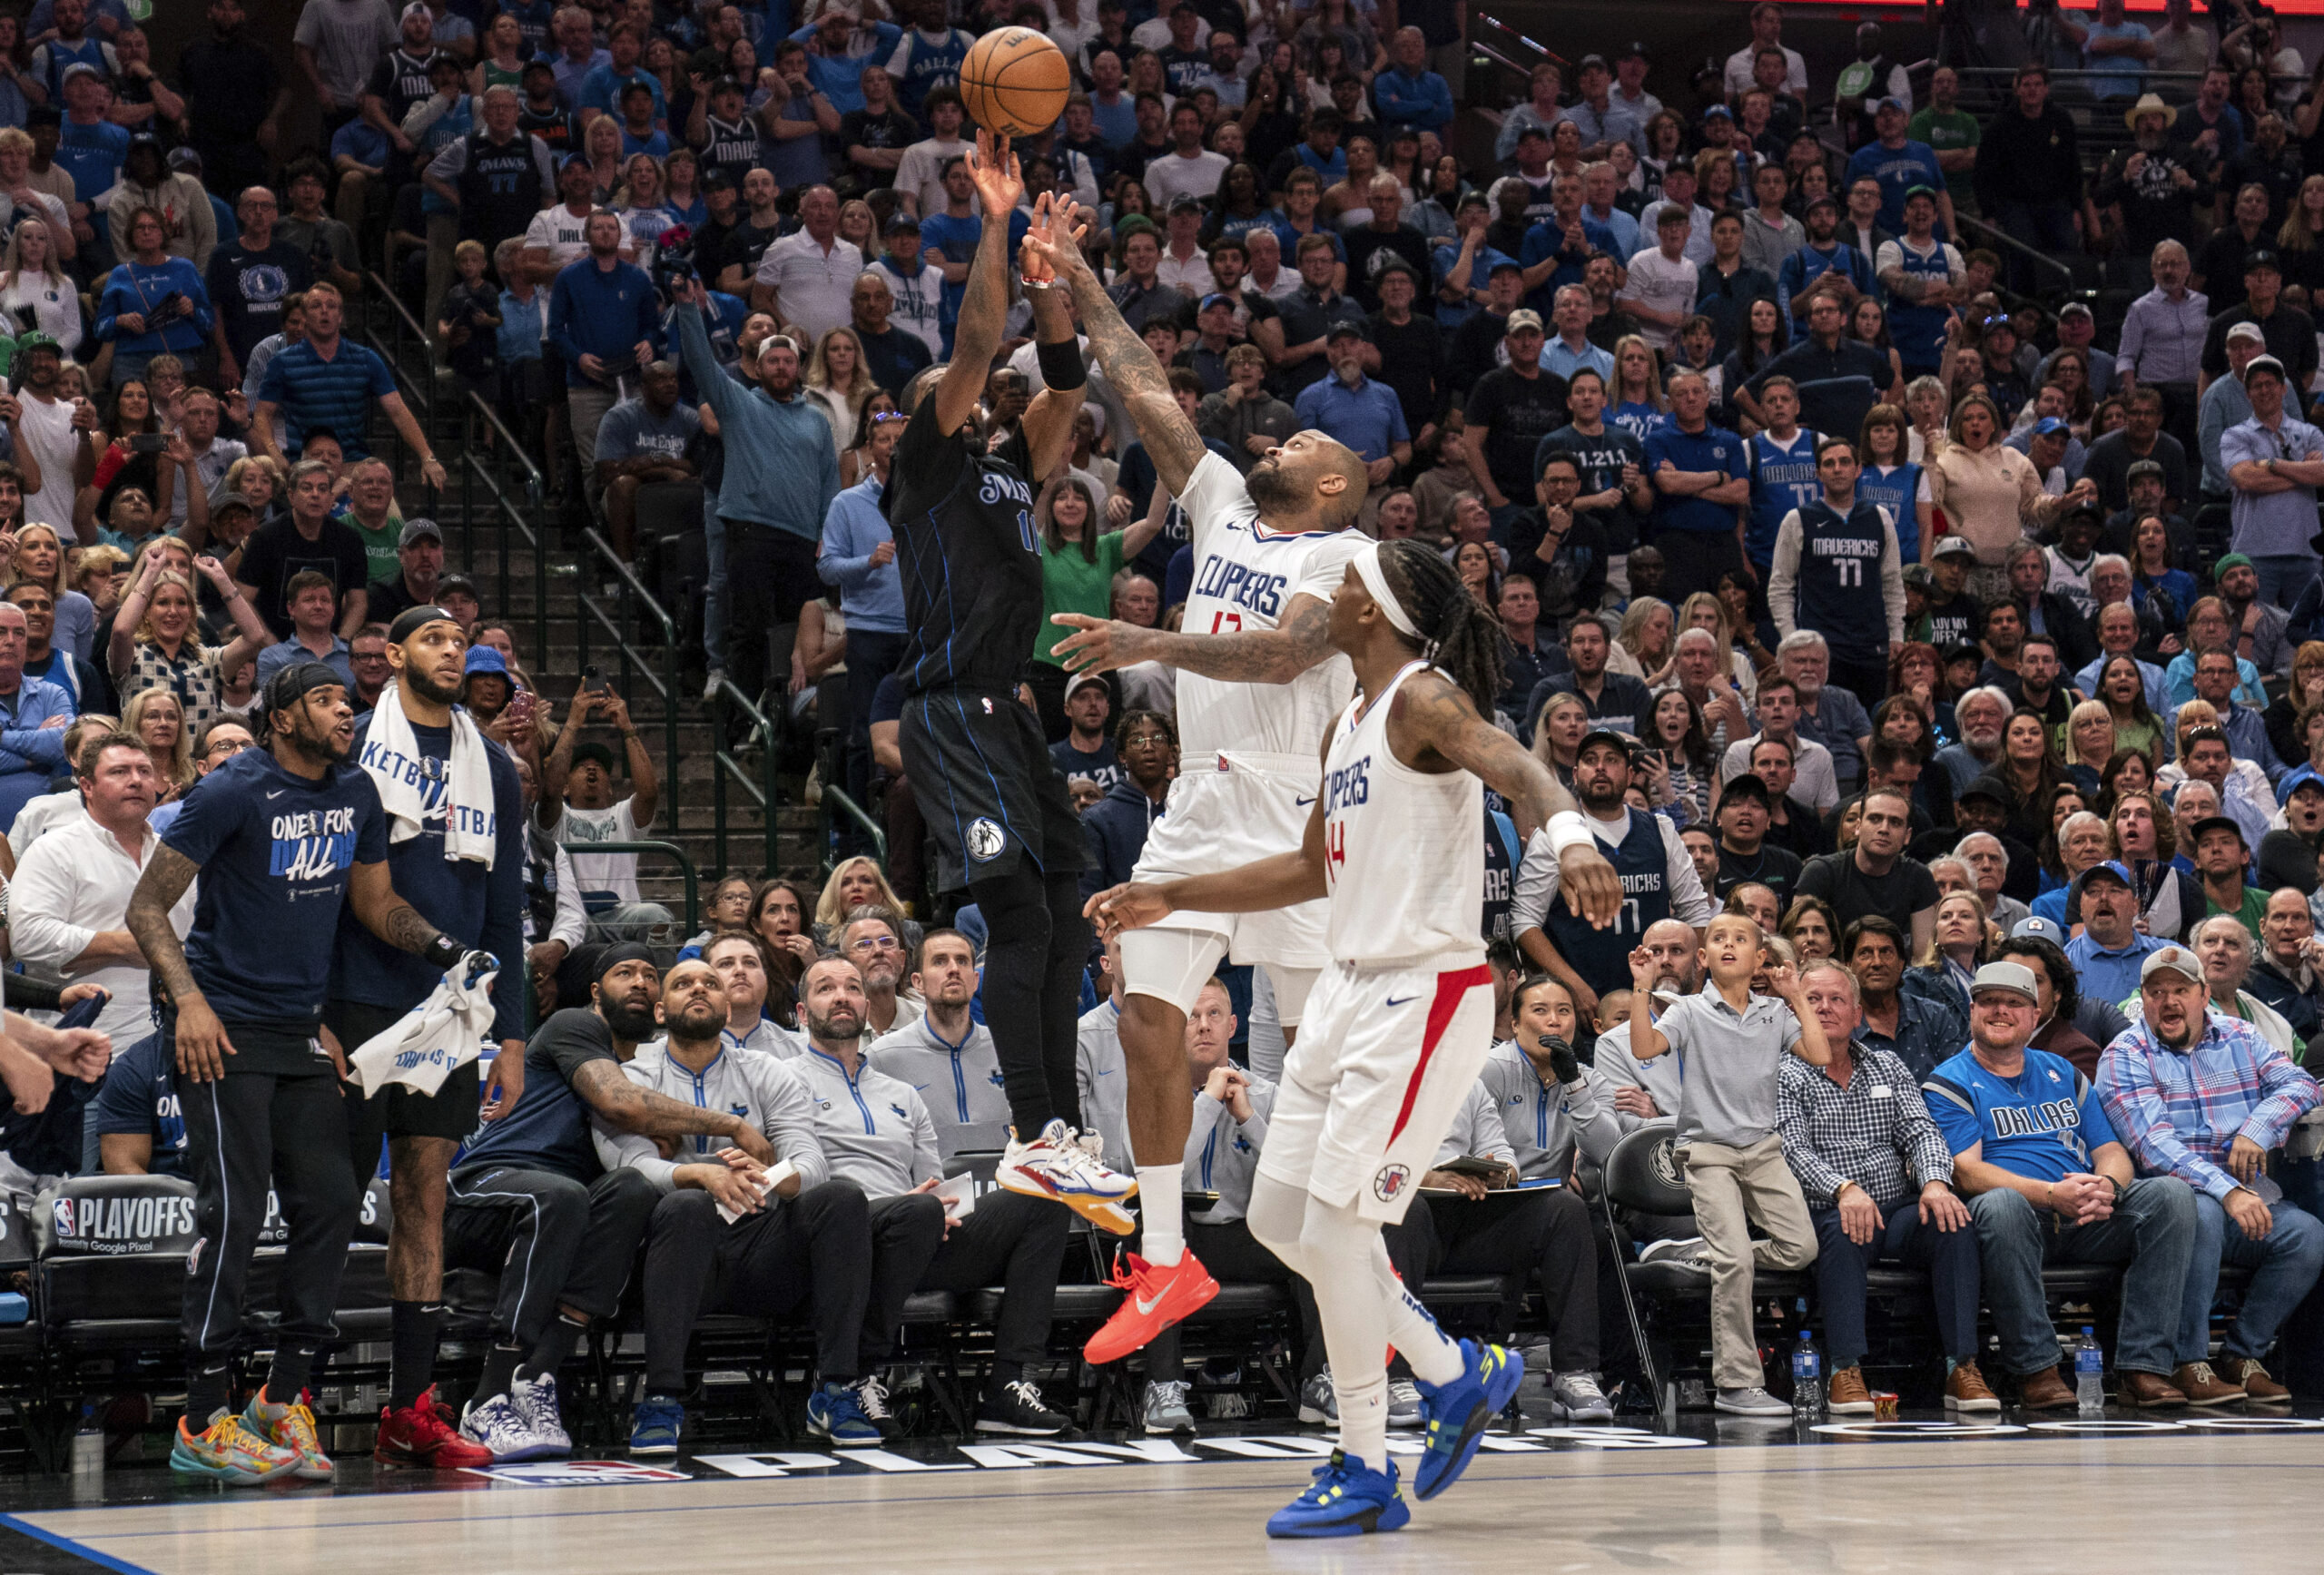 doncic, irving carry mavericks past clippers and into 2nd round